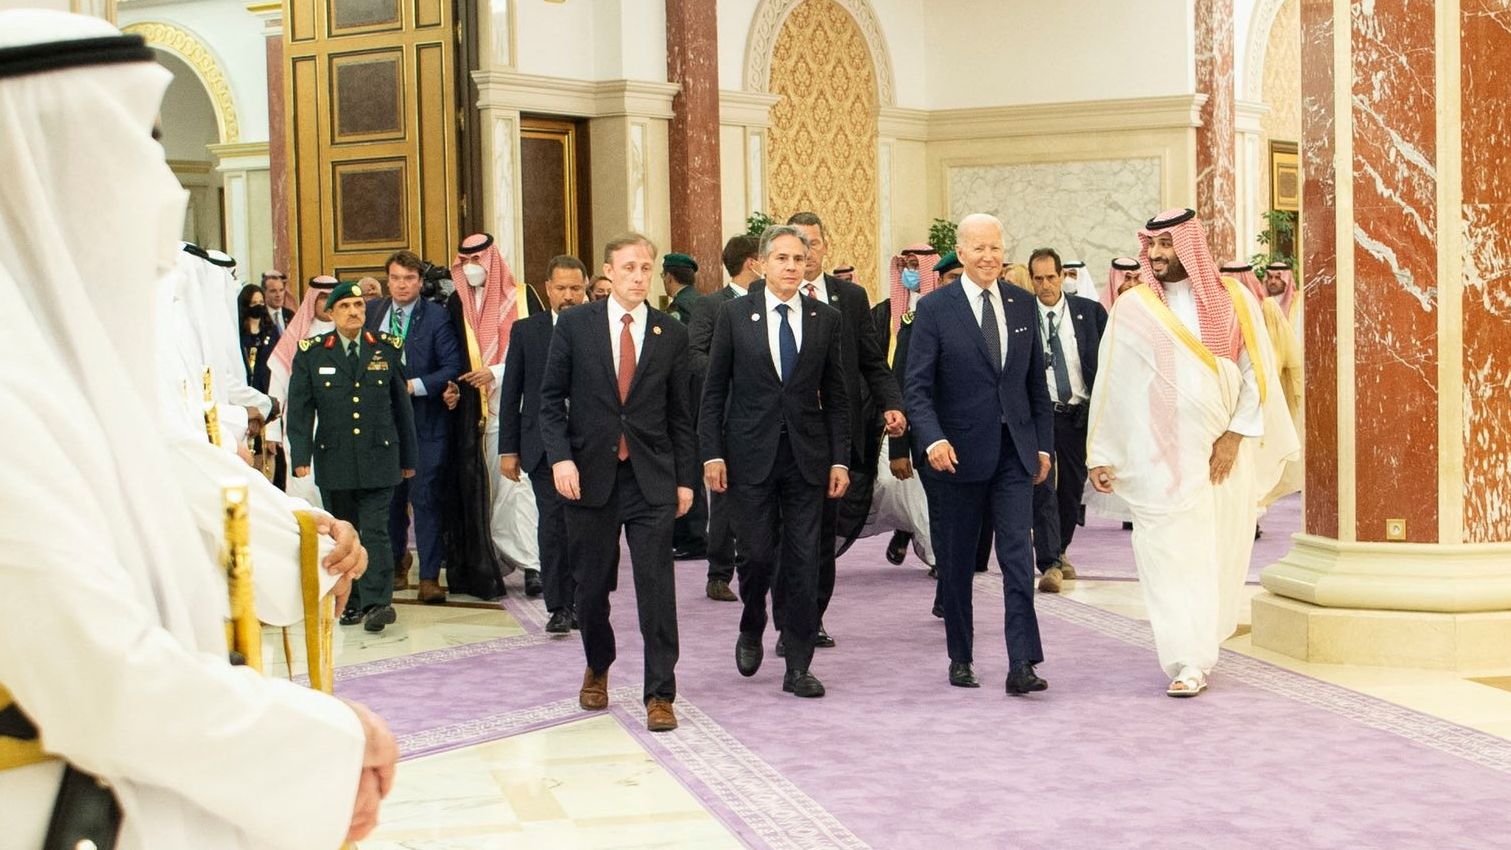 Biden is joined by US Secretary of State Antony Blinken as the Saudi Crown Prince receives them at the palace on Friday.